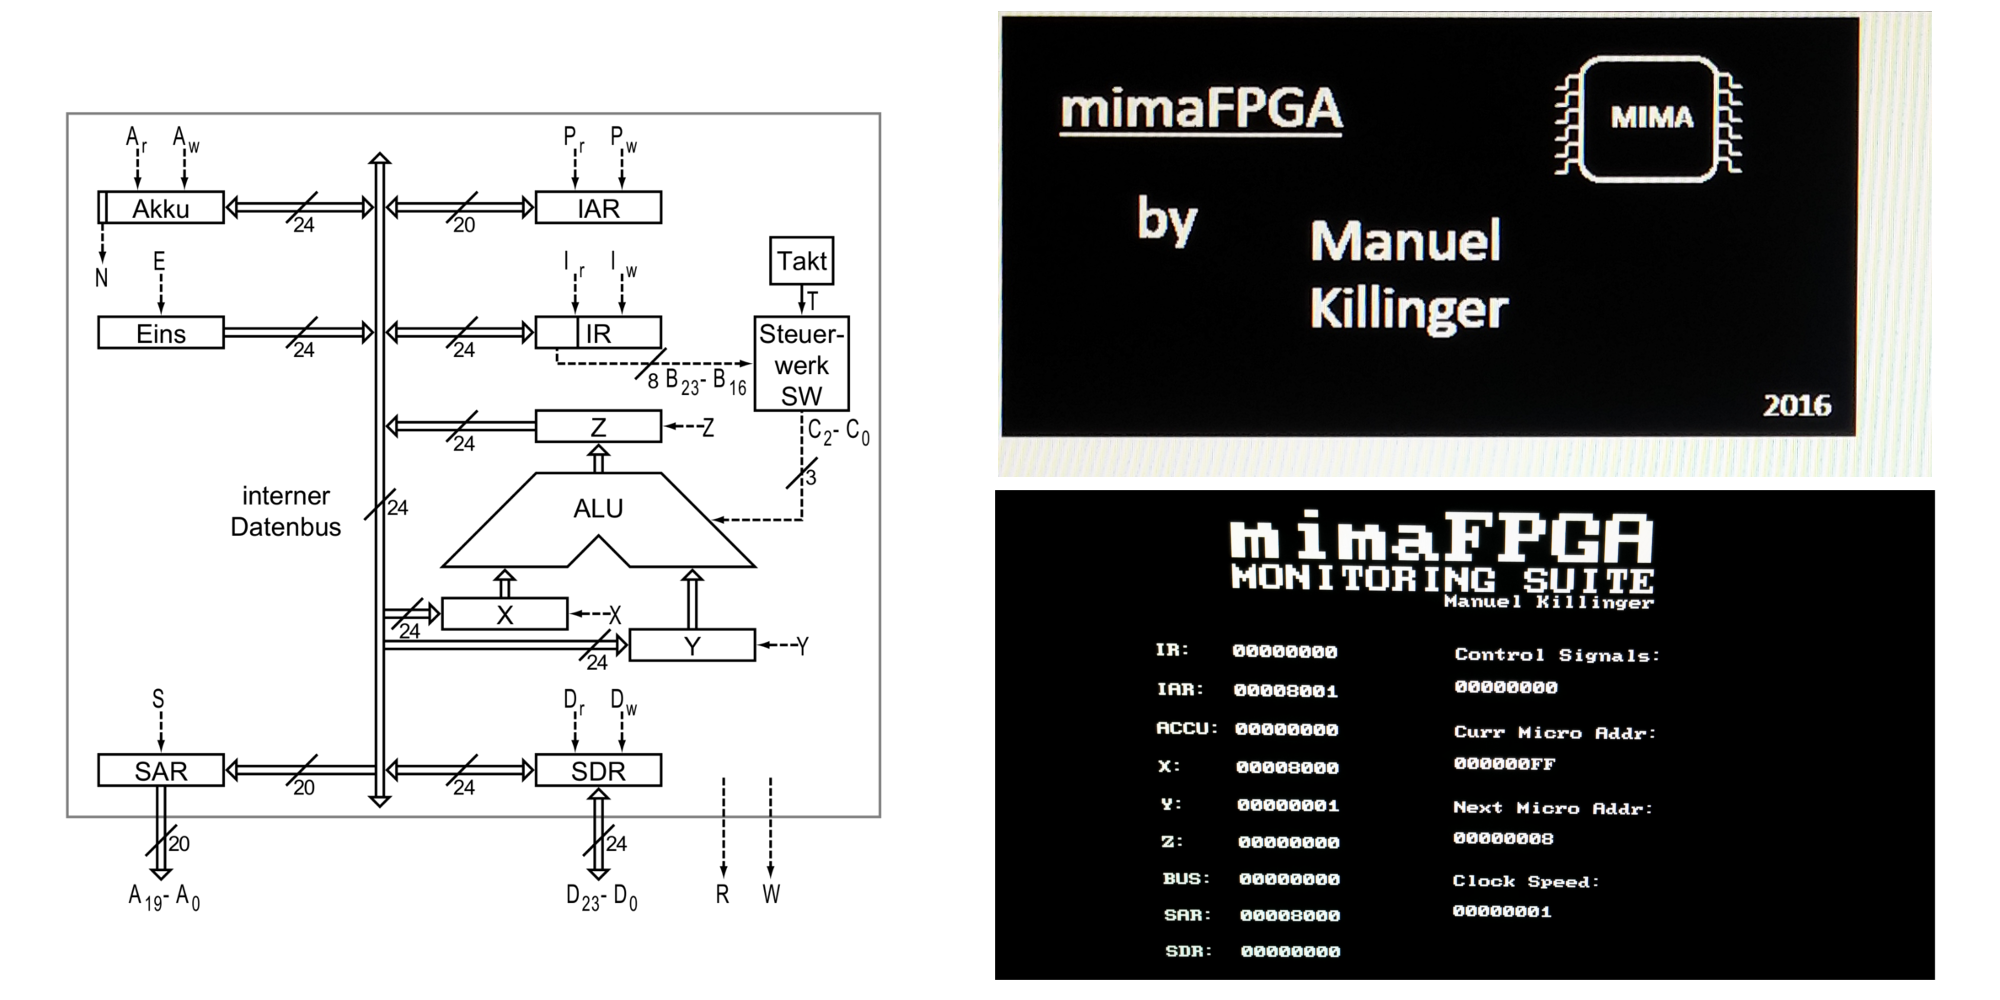 left: MIMA architecture, top right: memory mapped screen, bottom right: monitoring suite